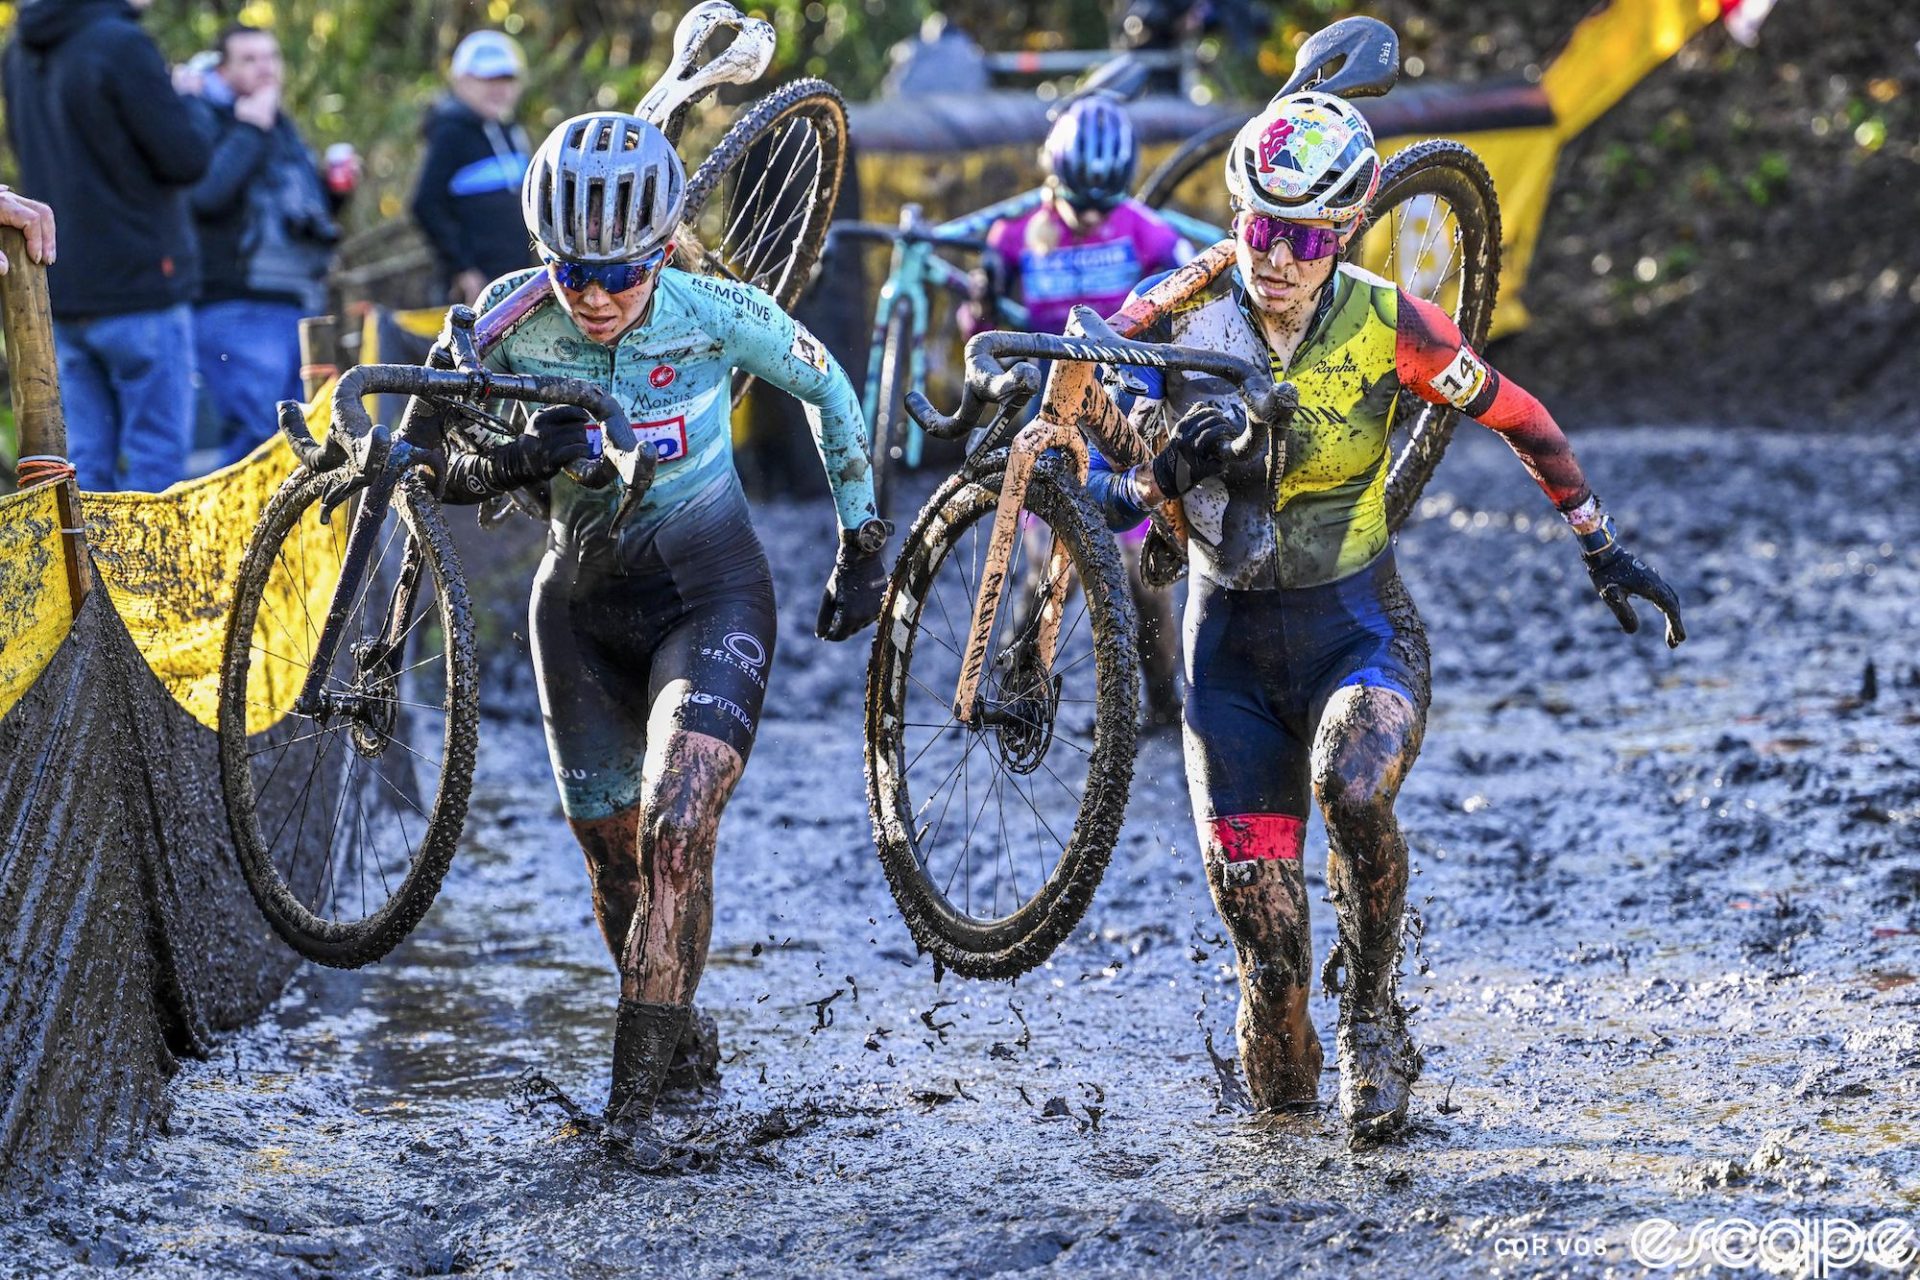 Amandine Fouquenet and Francesca Baroni shoulder their bikes and run through soupy mud during the women's Superprestige round in Niel. 